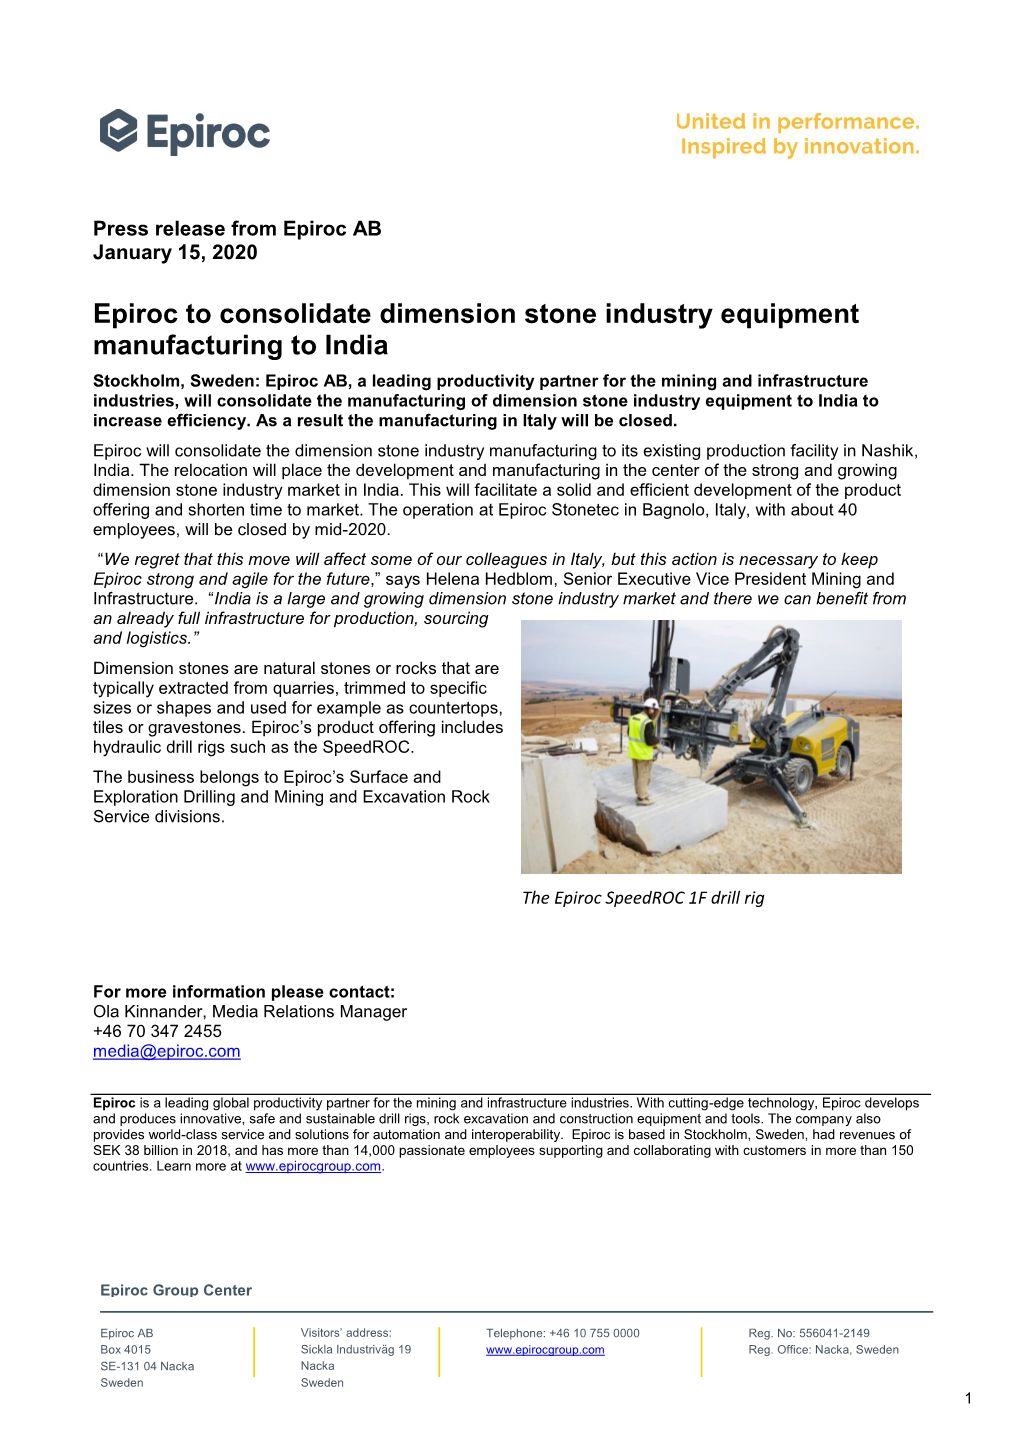 Epiroc to Consolidate Dimension Stone Industry Equipment Manufacturing